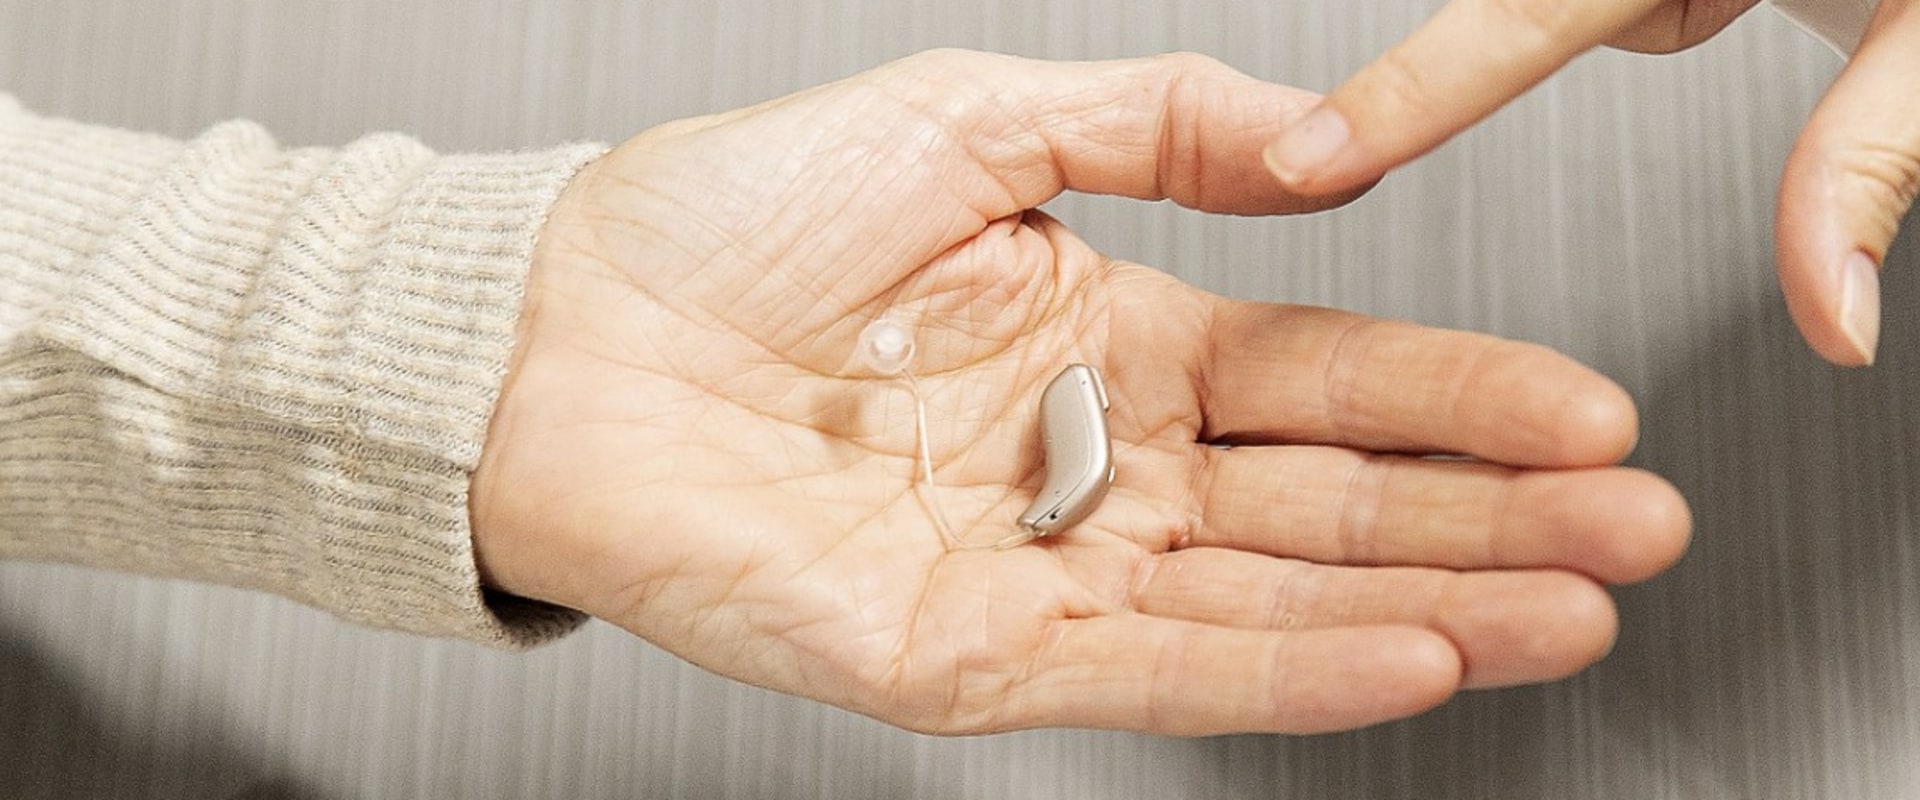 Where are hearing aids used?